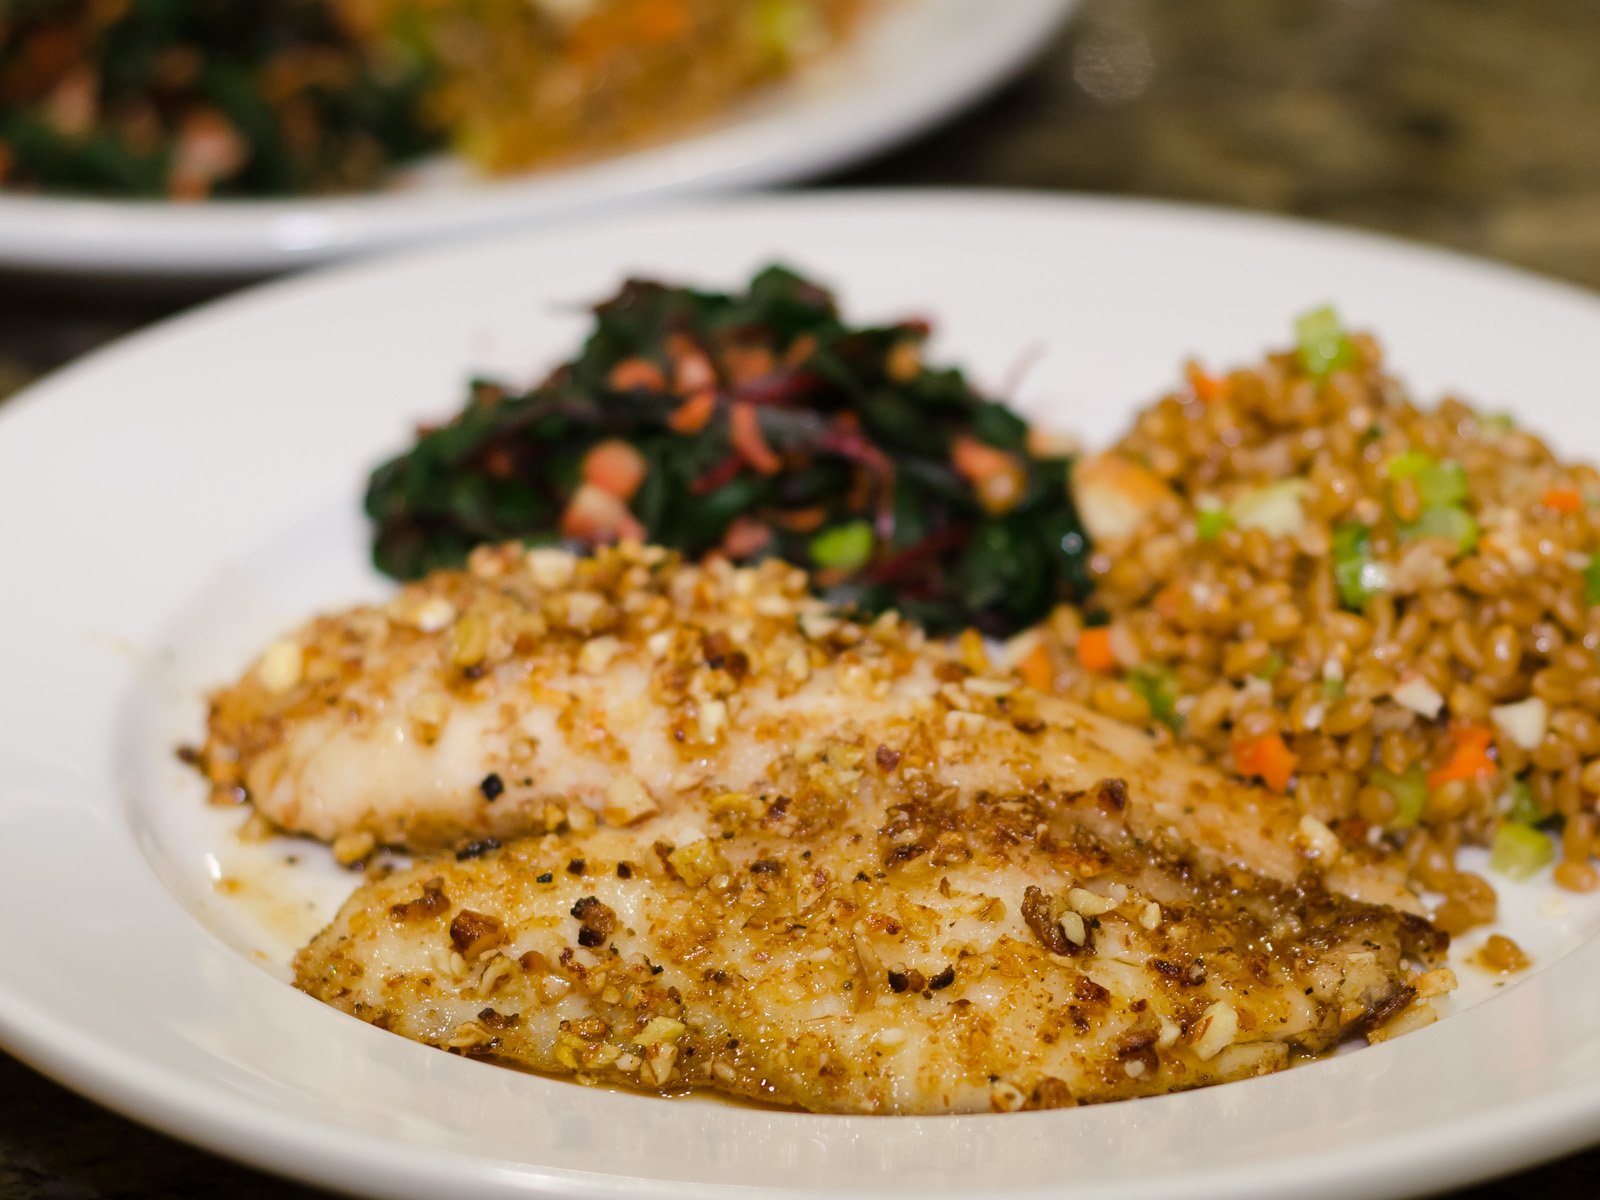 Plate with Almond Crusted Tilapia